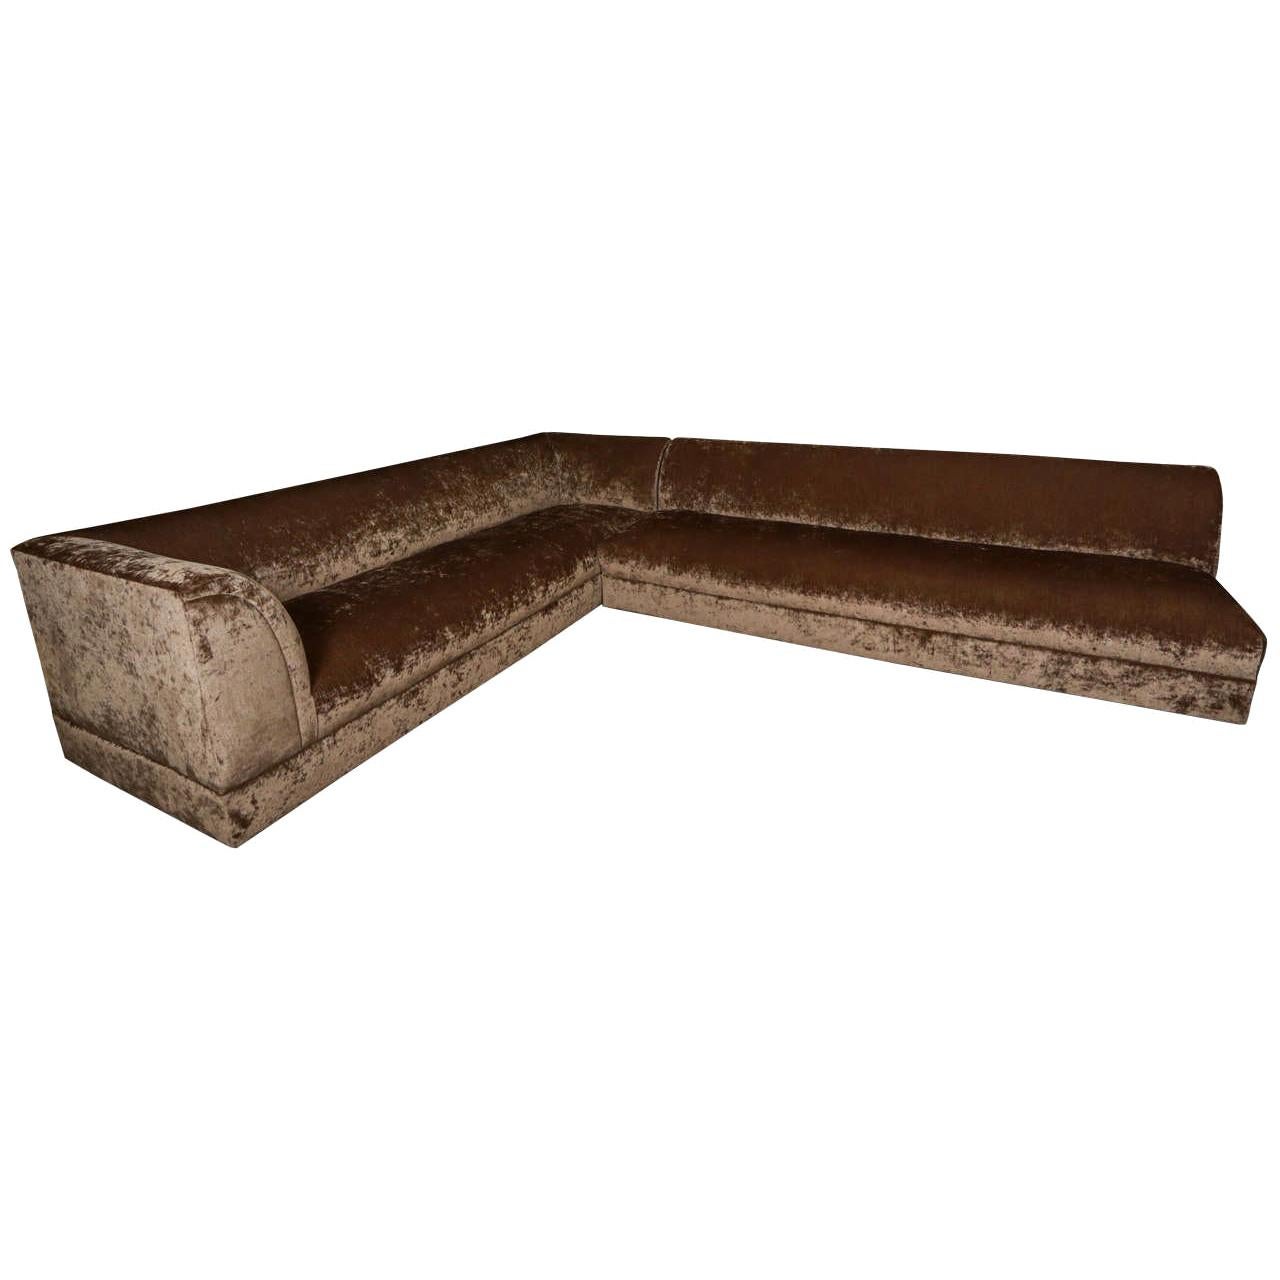 Exquisite Two-Piece Sectional Sofa by Steve Chase